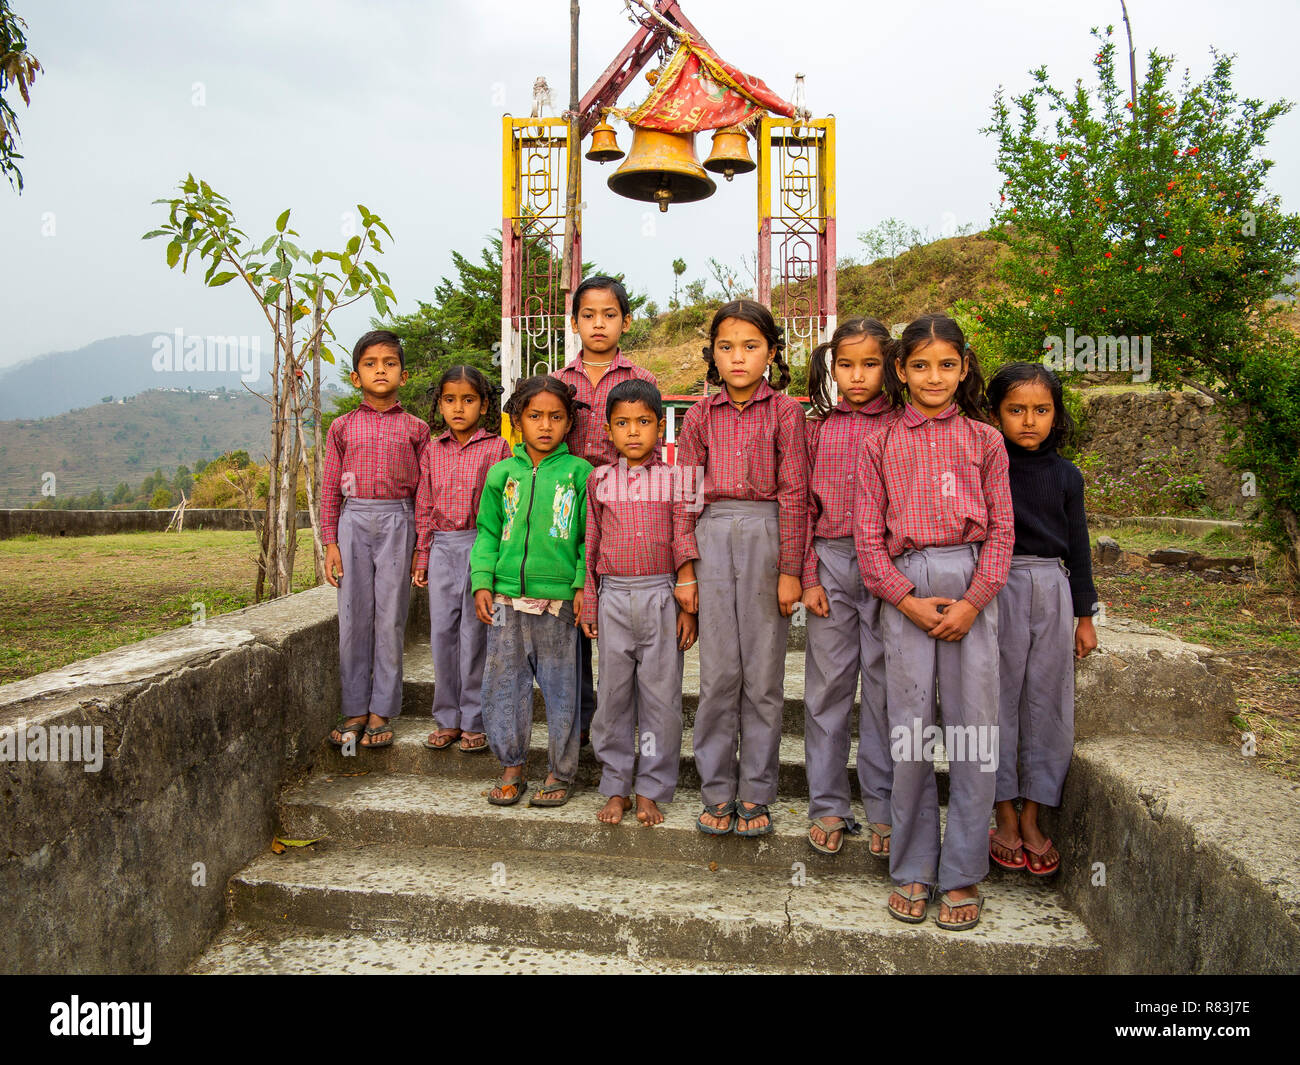 Young kids from Sanouli village posing in front of the temple gate, Sanouli, Uttarakhand, India Stock Photo